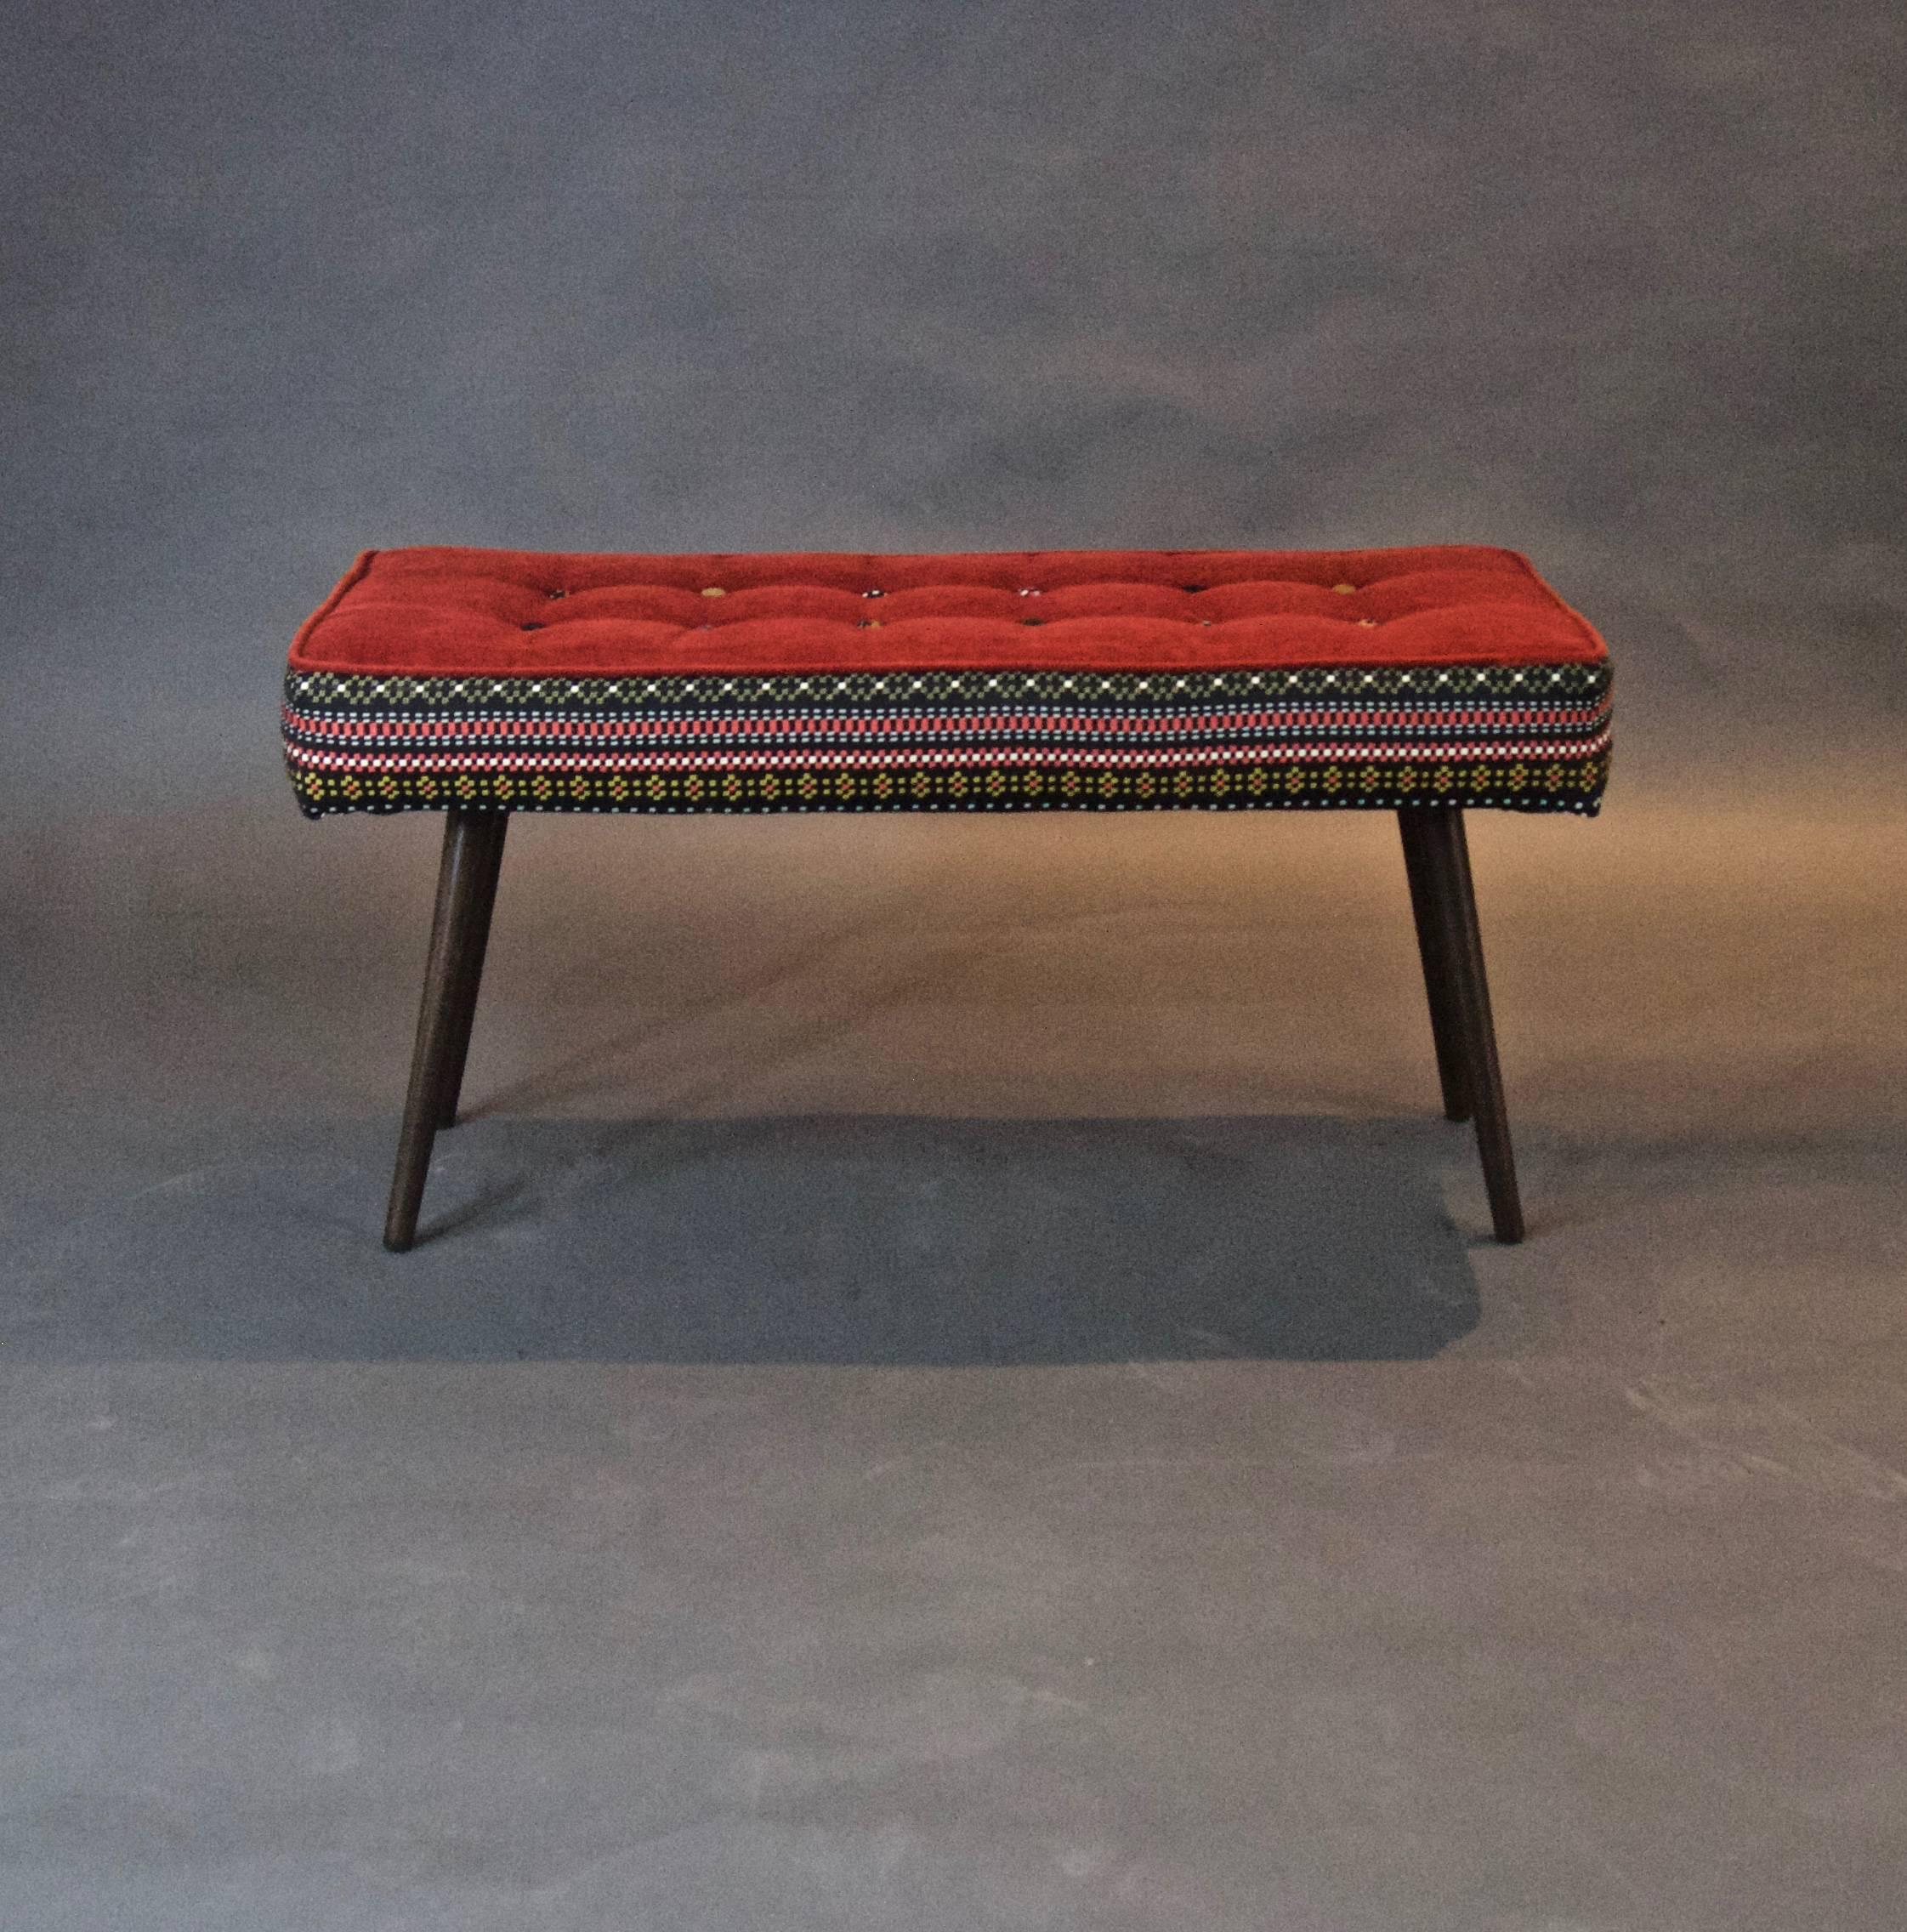 The Studio series bench is designed to add color and drama to an entryway, punctuate the end of a hallway, or adorn the foot of the bed.

The side panels are covered in our Folklorica weave print that can complement or enliven any room-traditional